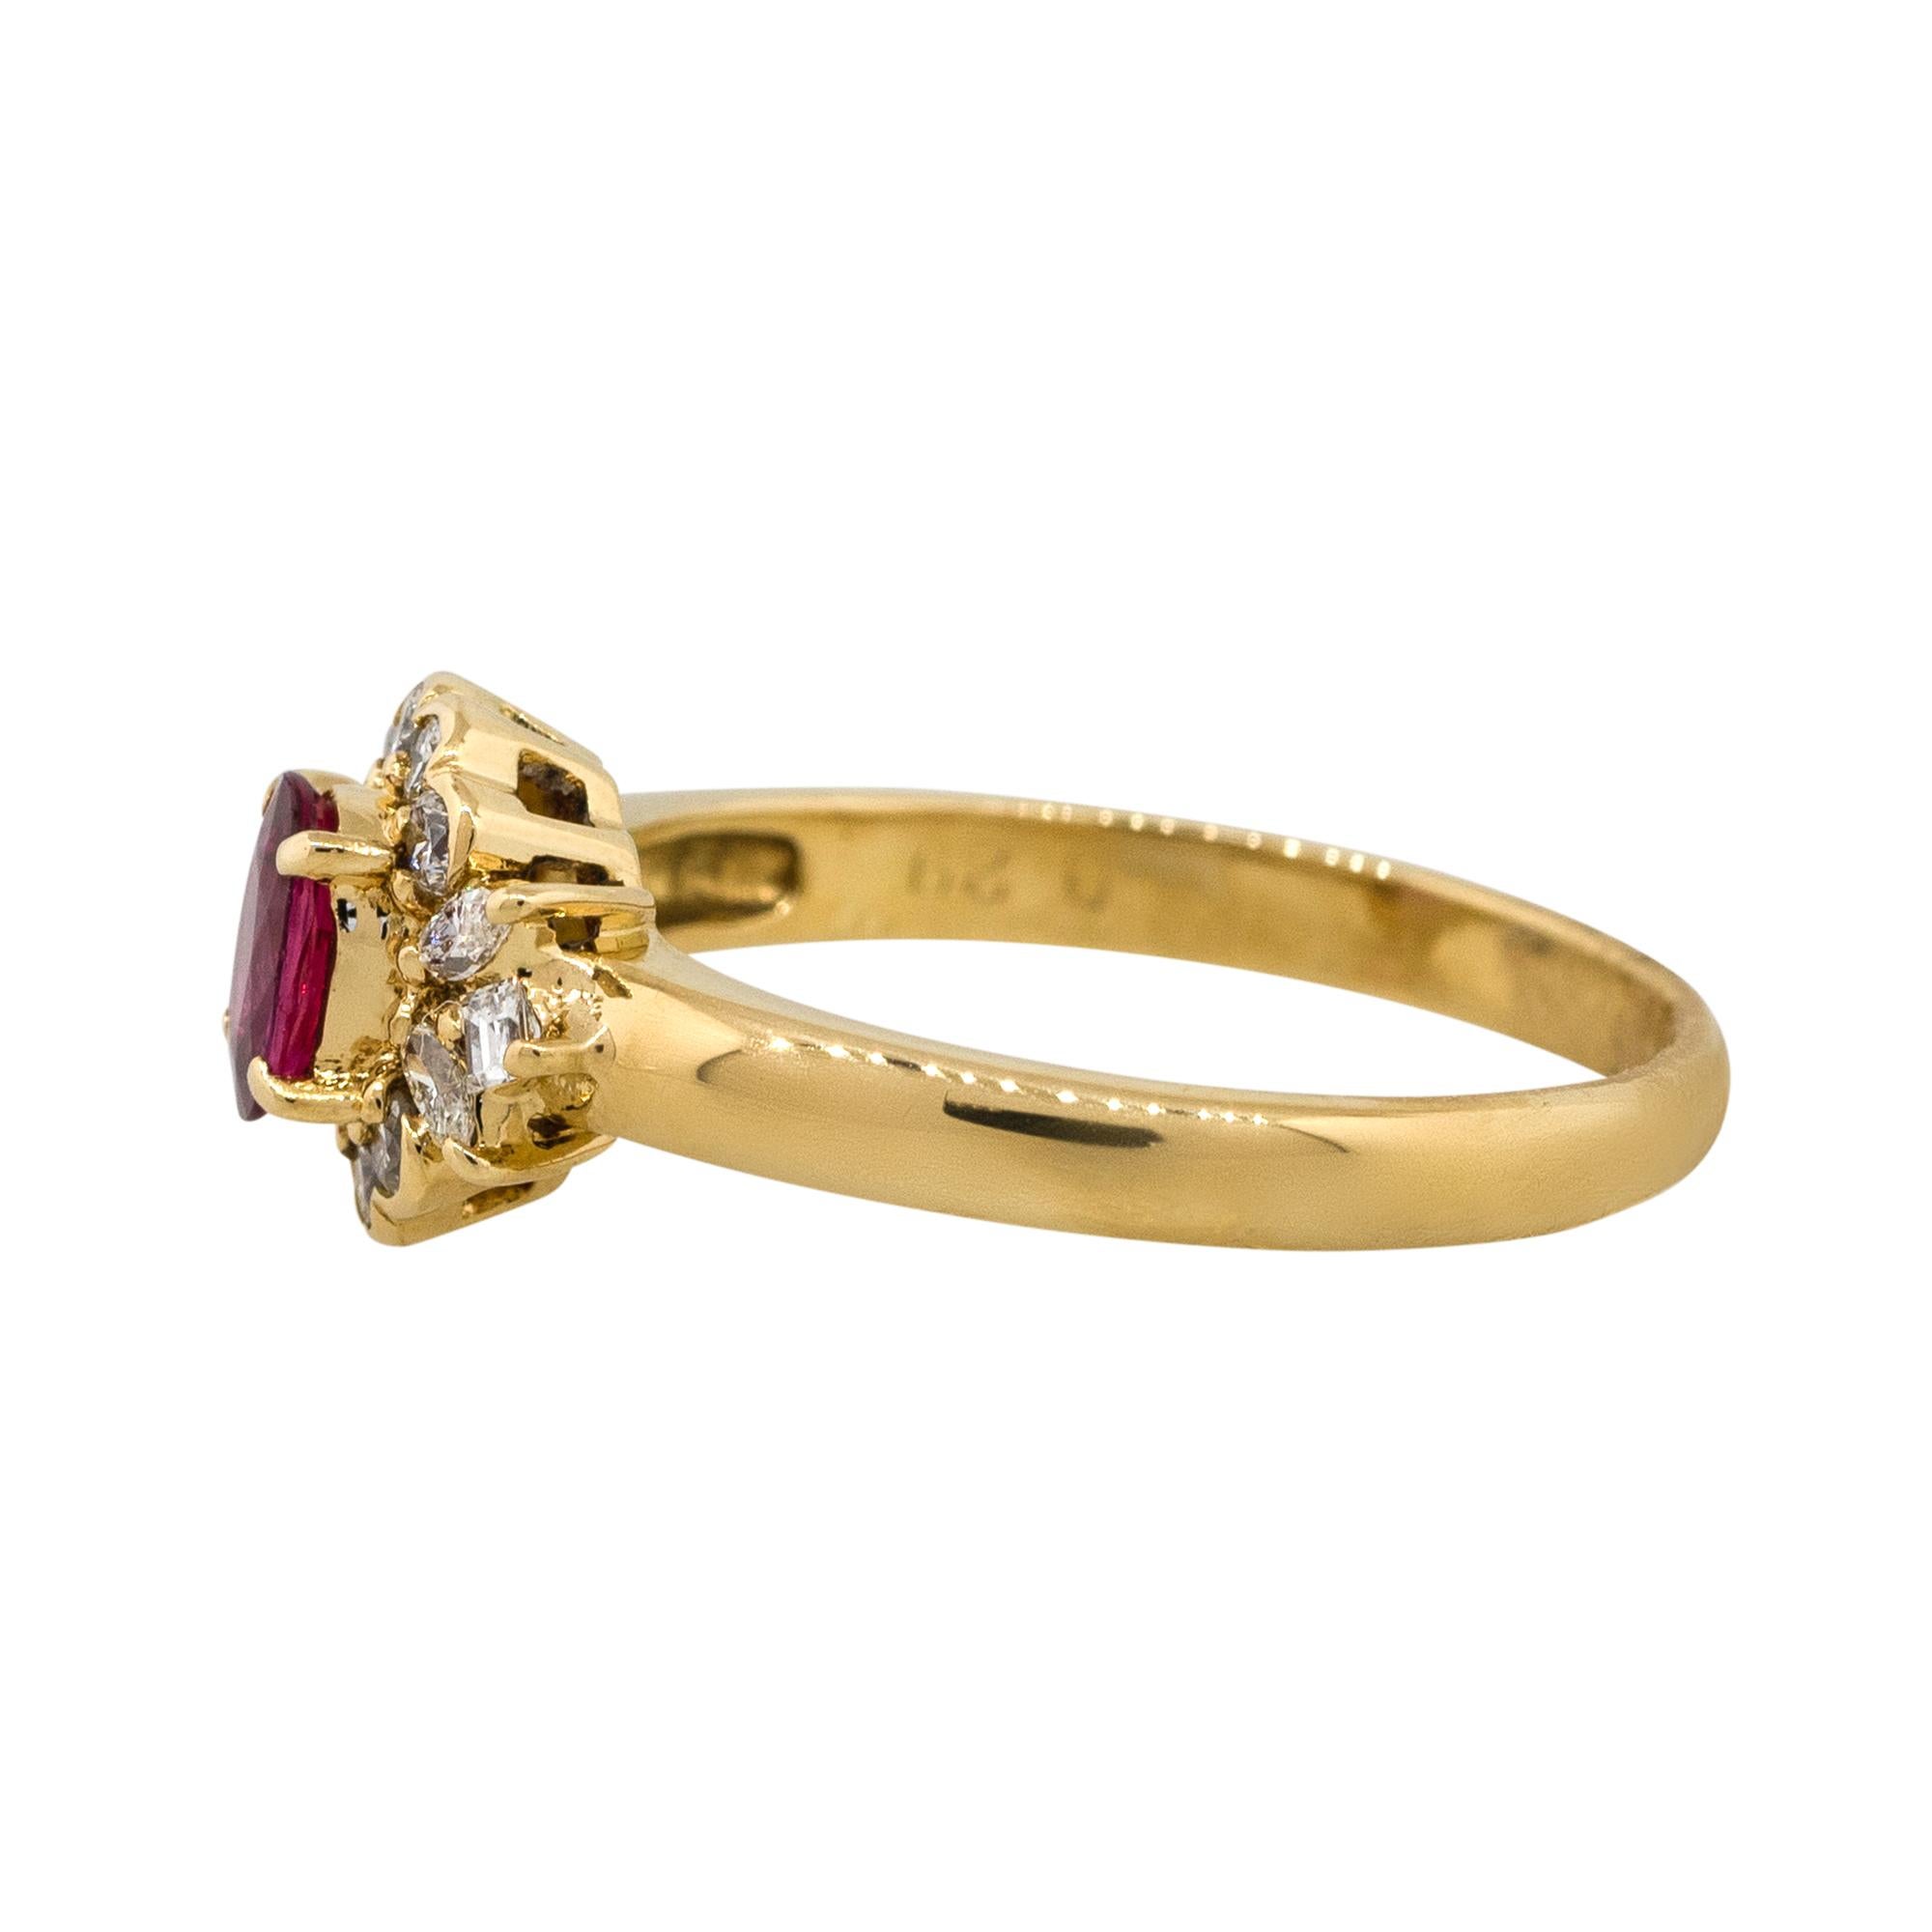 Oval Cut 0.45 Carat Oval Ruby Center Diamond Scalloped Ring 18 Karat in Stock For Sale